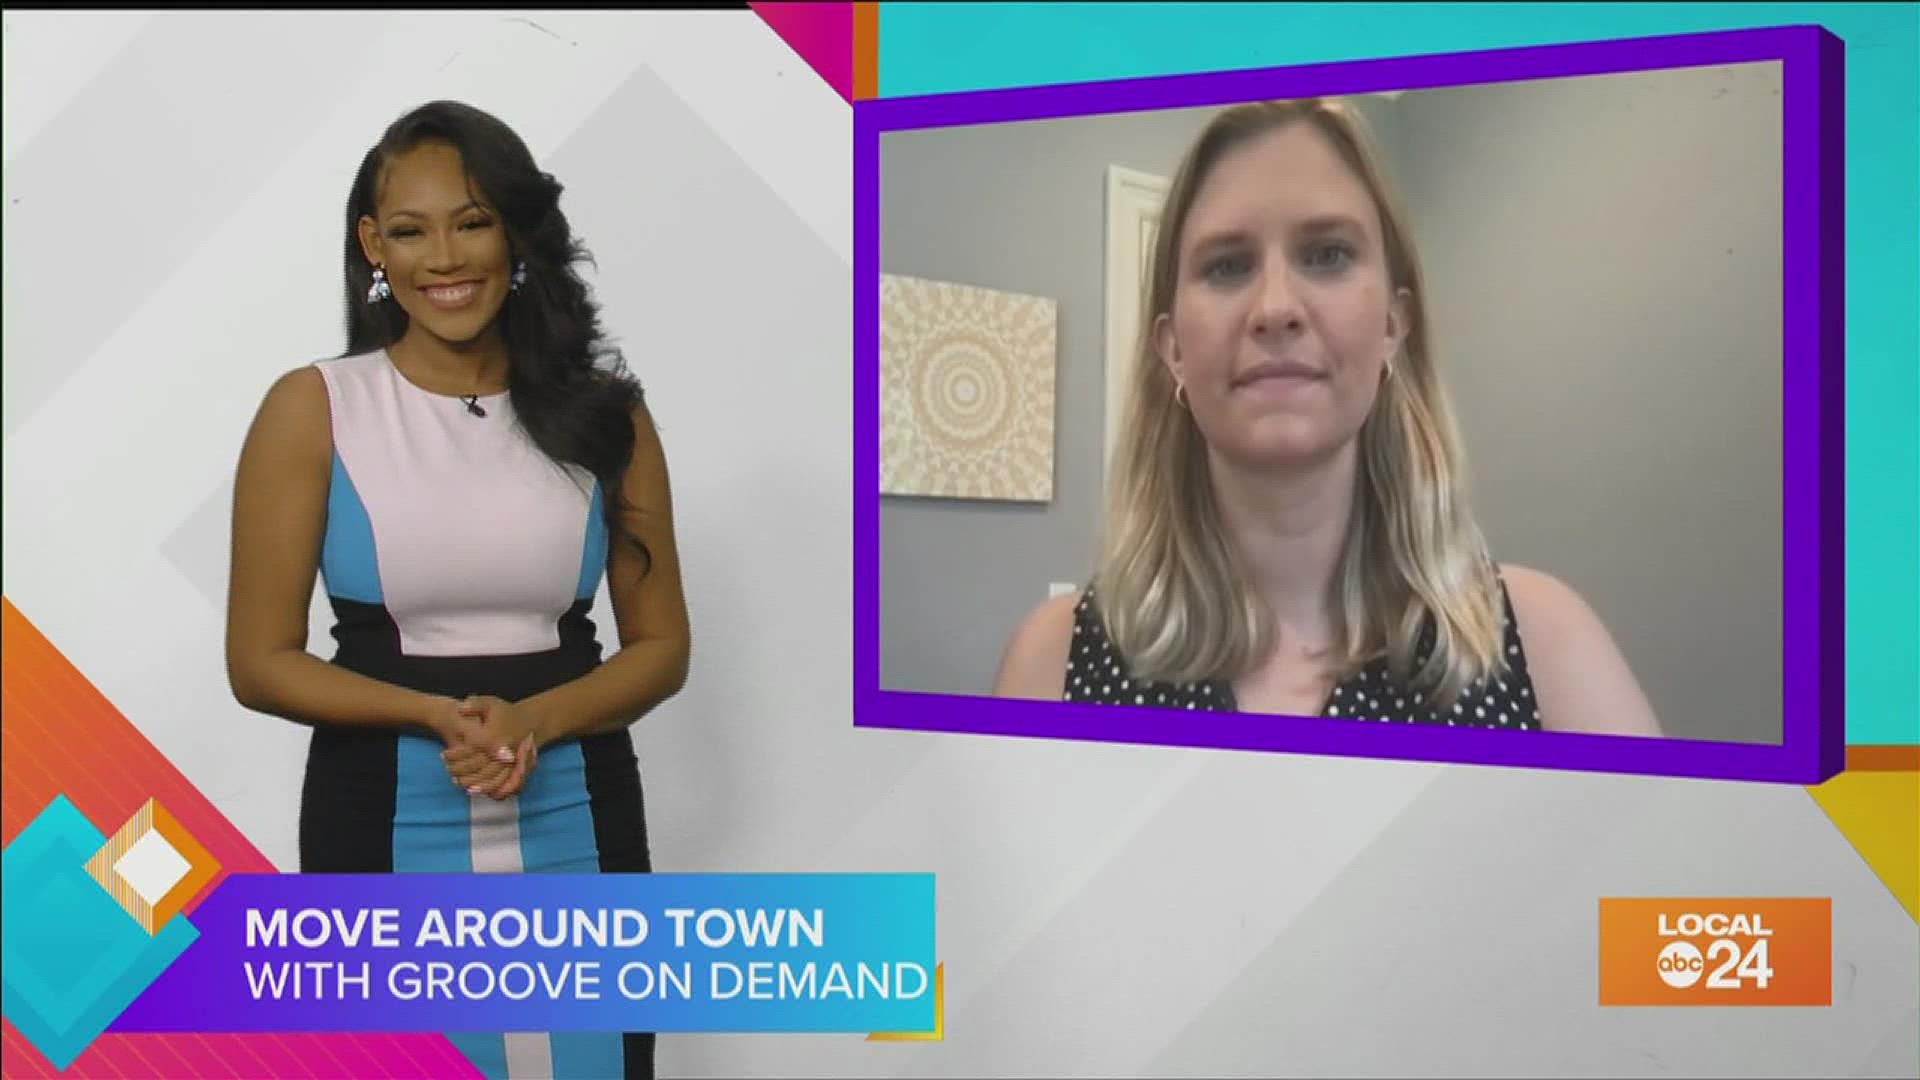 Join Sydney Neely and guest star Olivia Blahut as we take a look at Groove on Demand. This app allows anyone to travel around Downtown Memphis for $1.25 per ride.